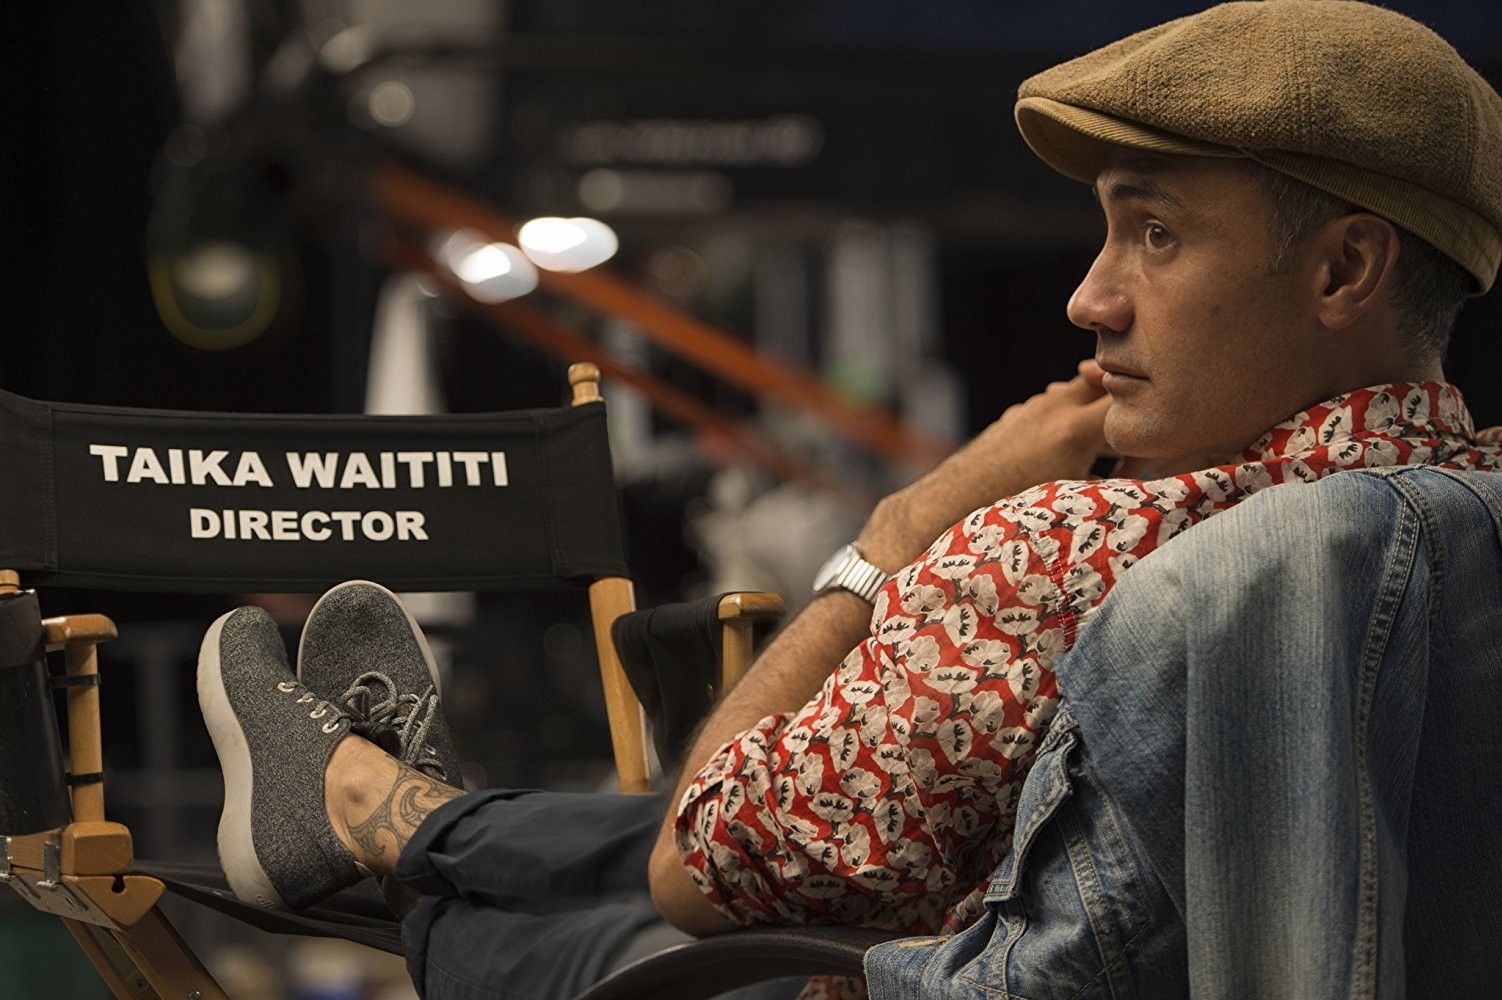 3 Lessons You Can Learn from Taika Waititi's Rough Draft Filmmaking